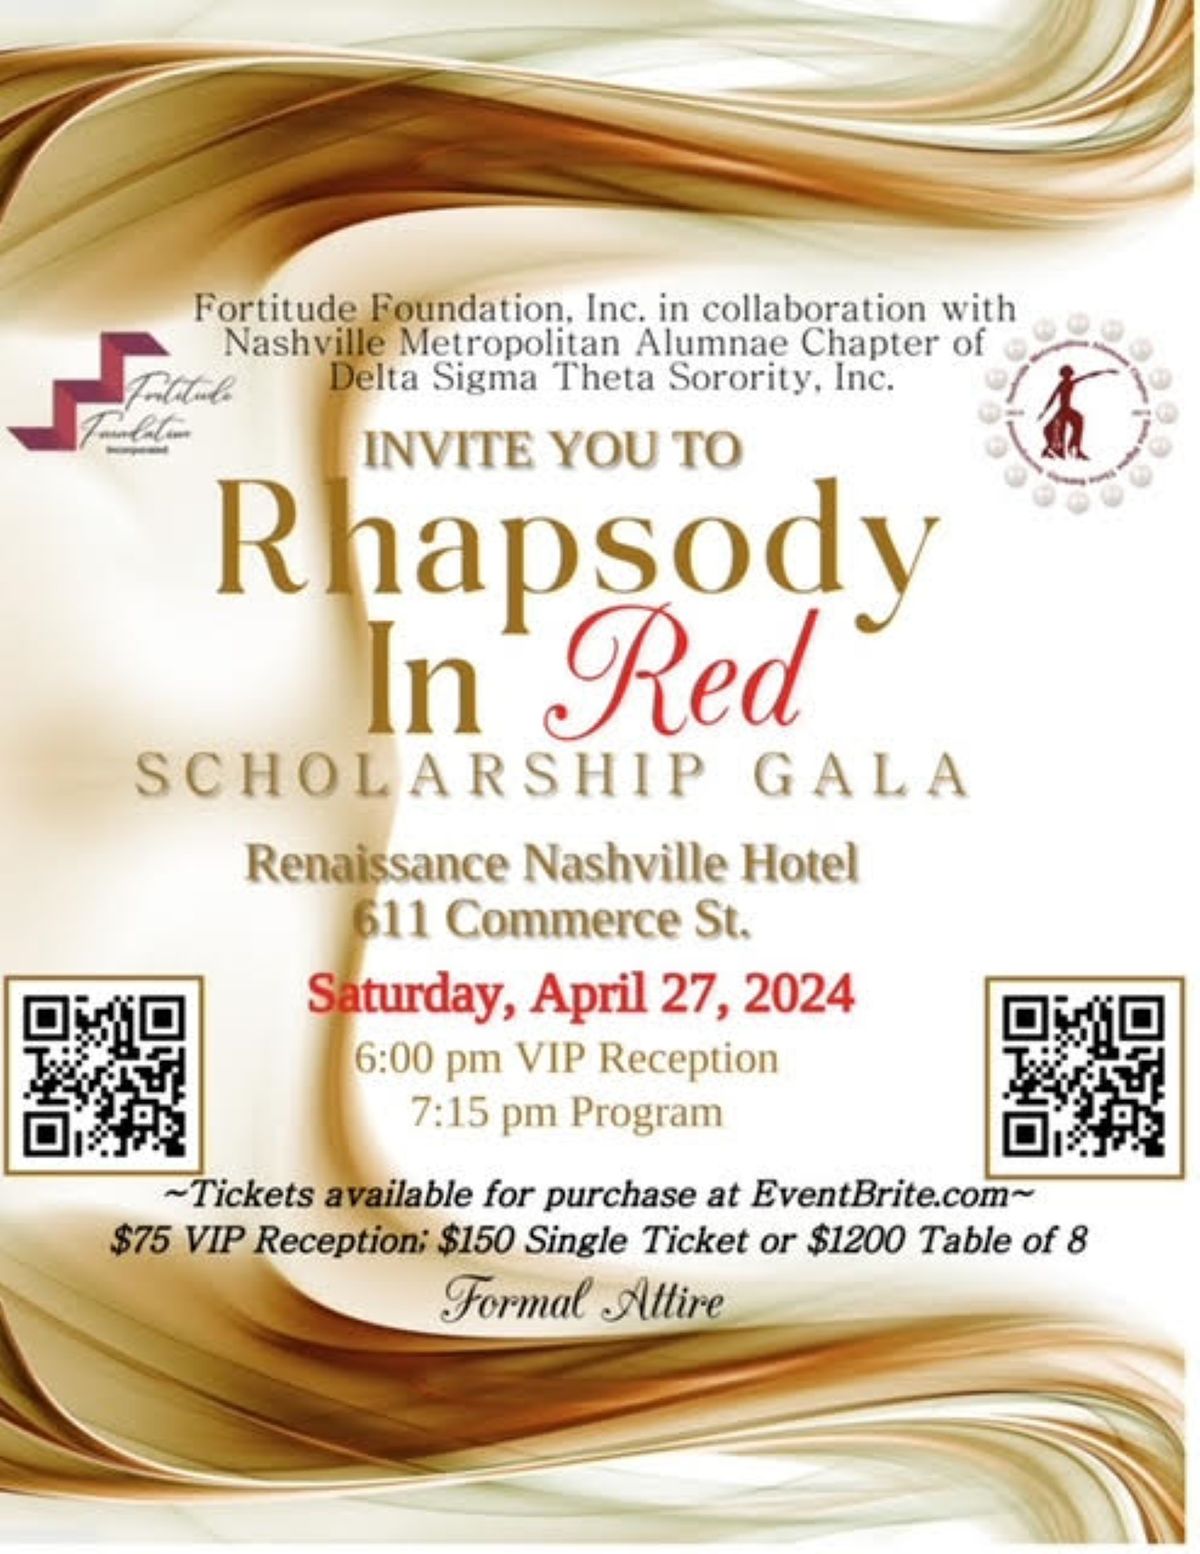 Rhapsody in Red Scholarship and Awards Gala 2024